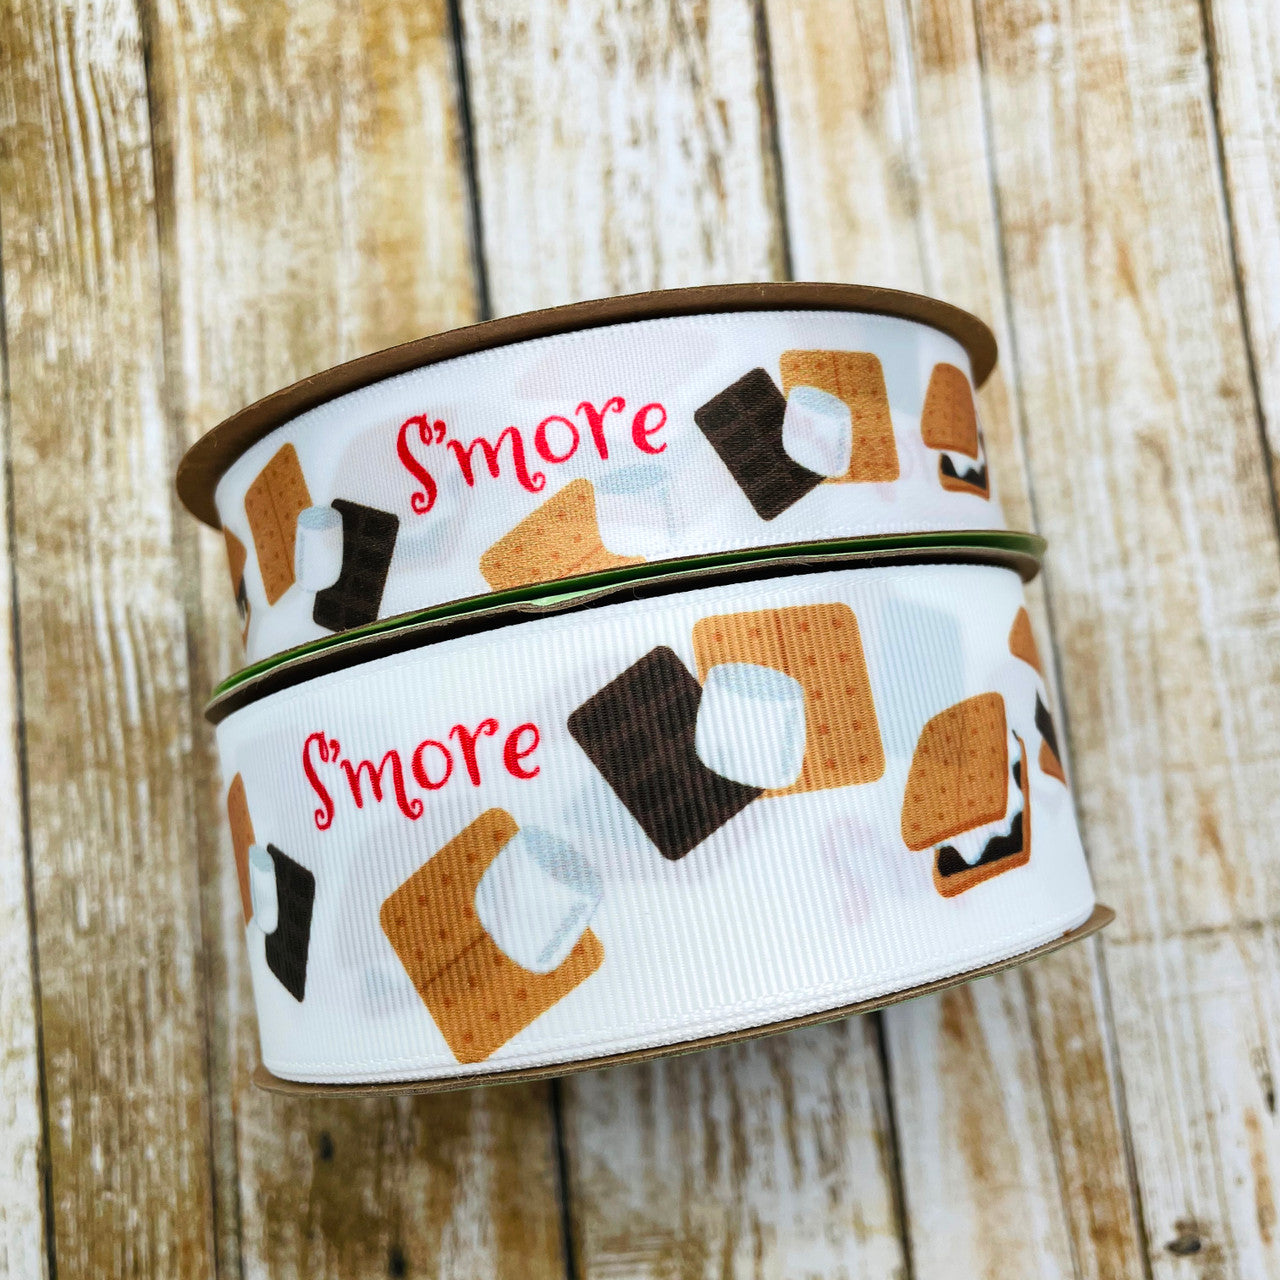 Our S'mores ribbon comes in 1.5" grosgrain and 7/8" satin for all you creative ideas!